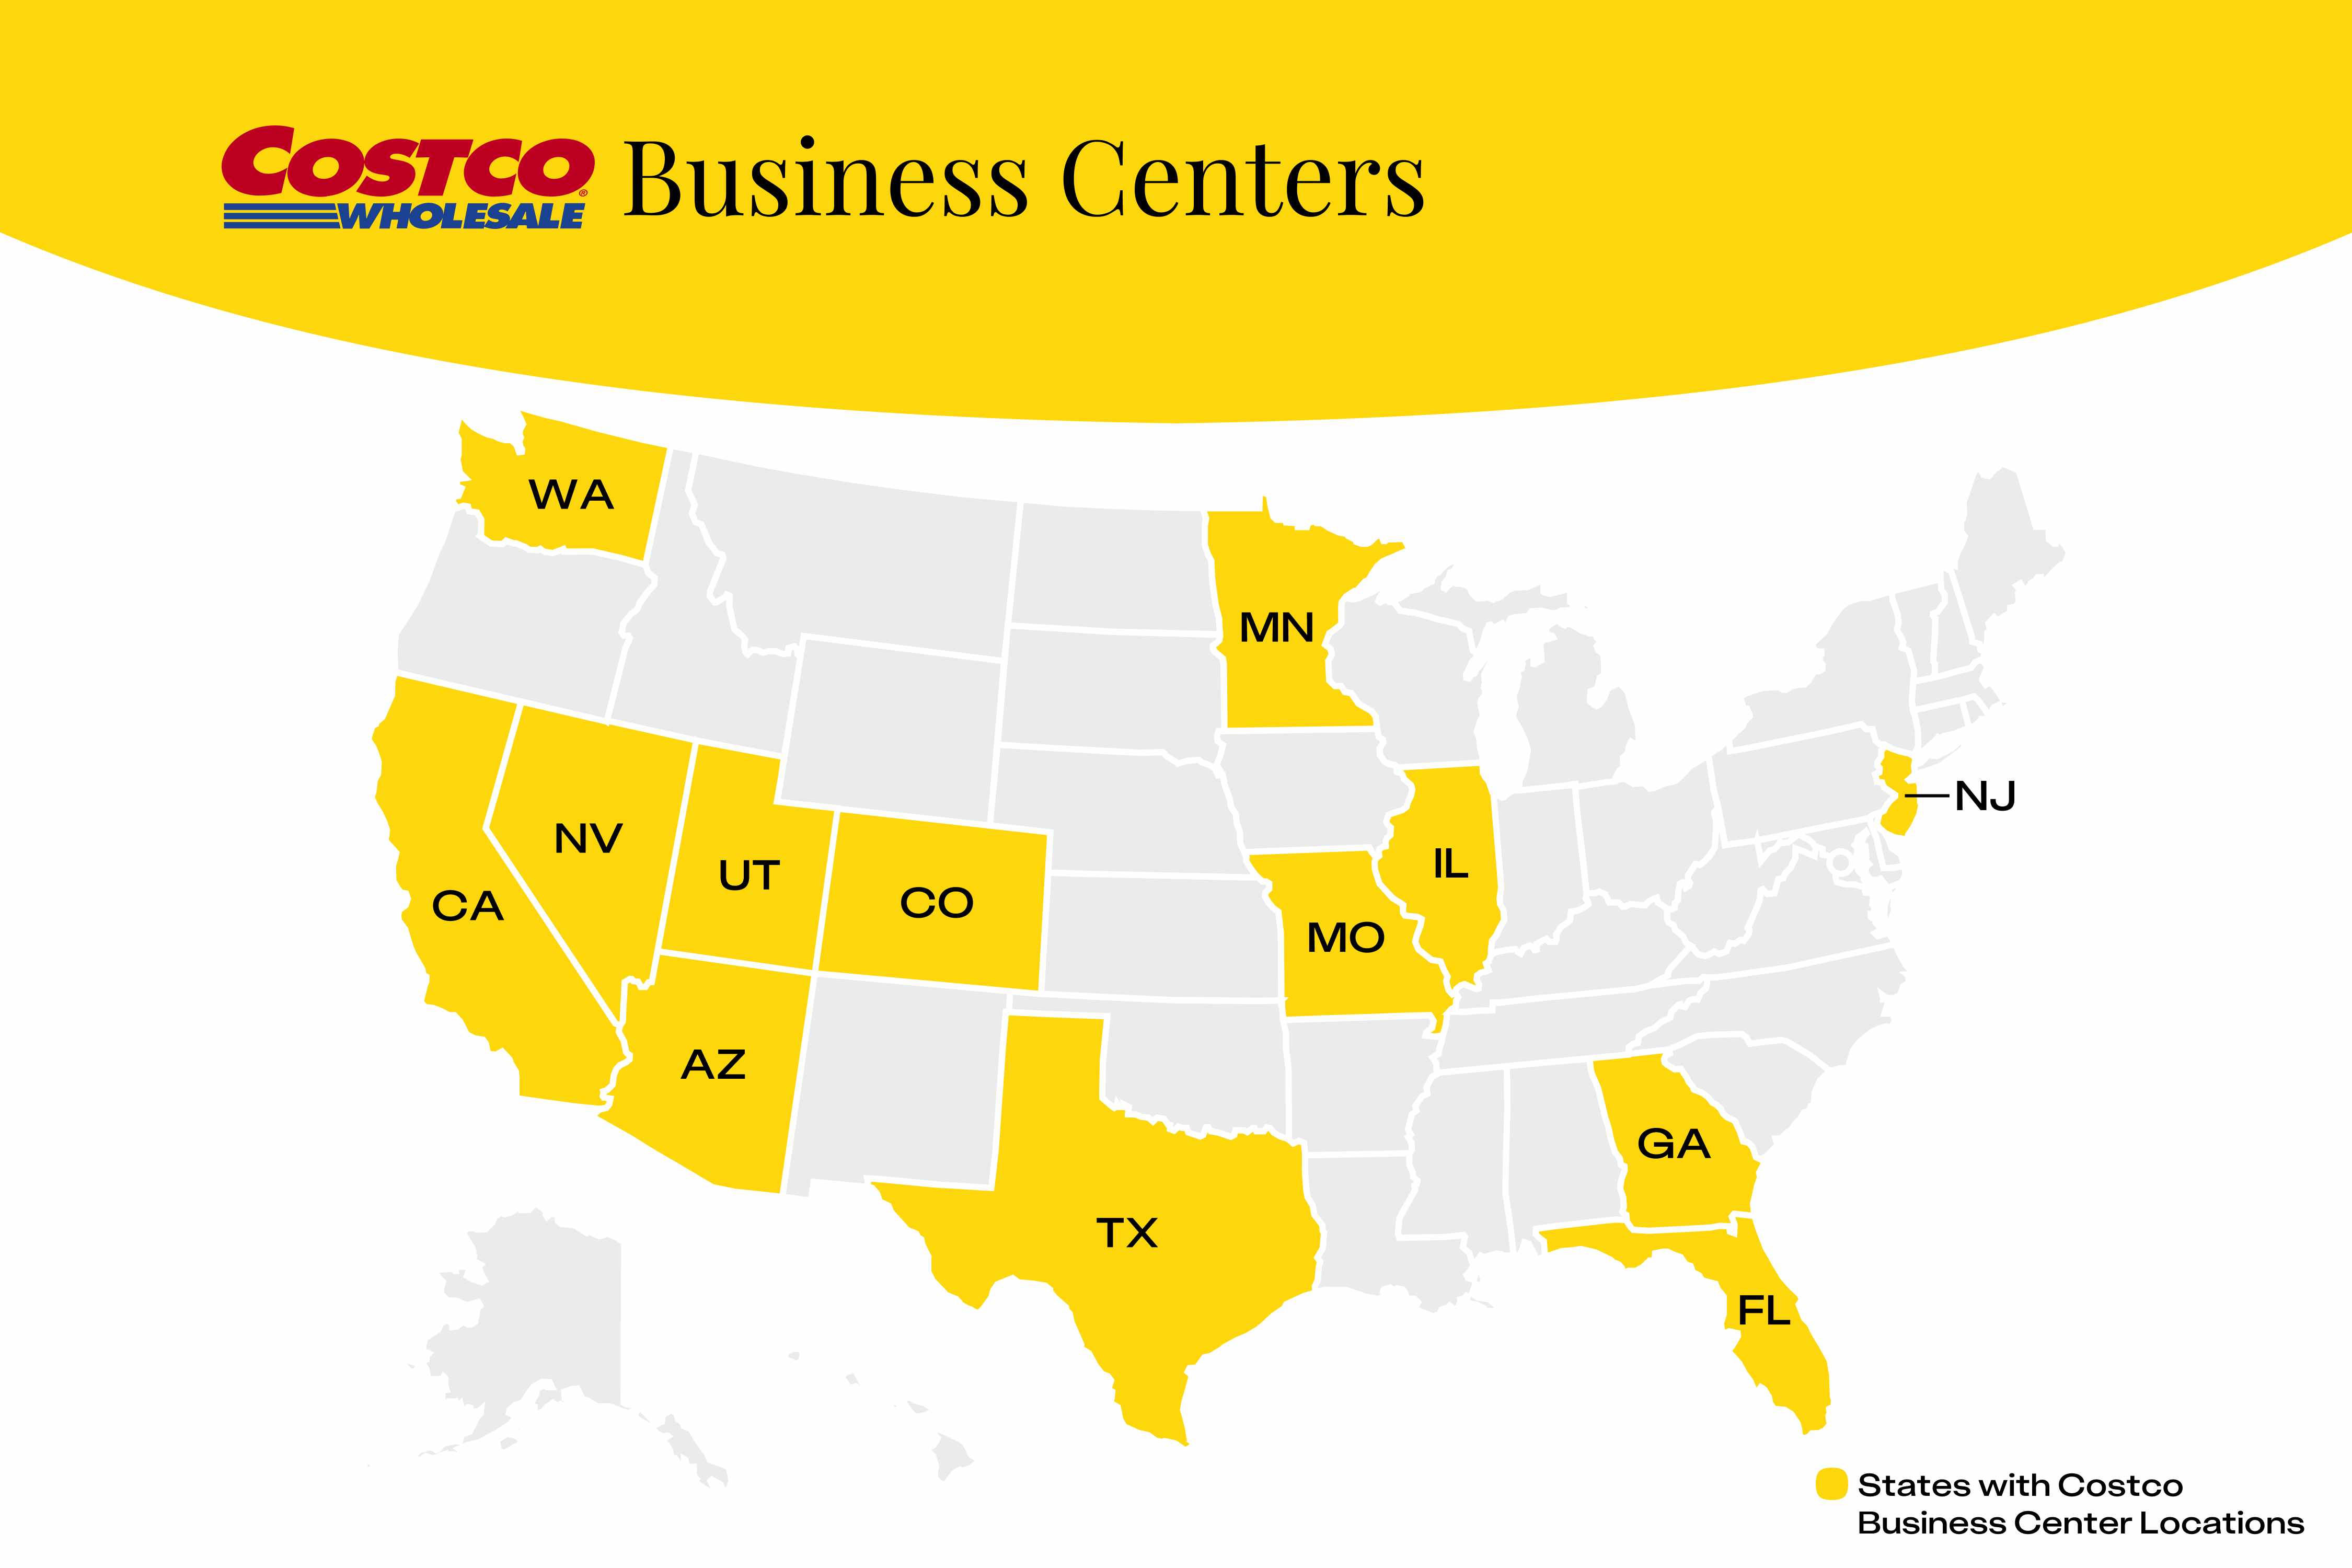 Map showing the U.S. states with Costco Business Center locations.